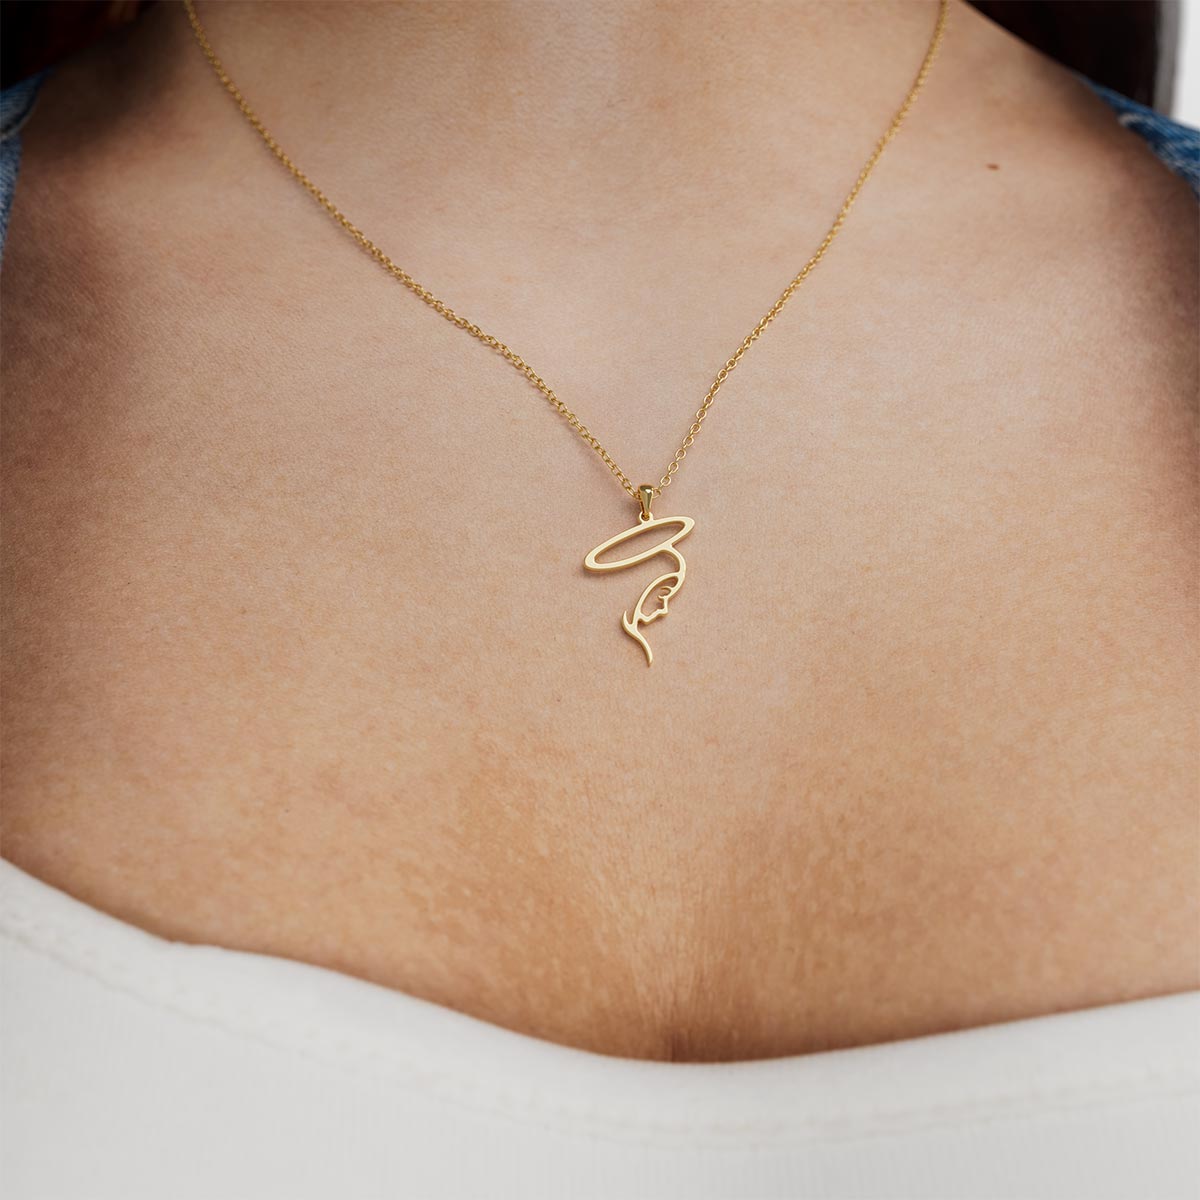 Abstract Virgin Mary Silhouette Necklace